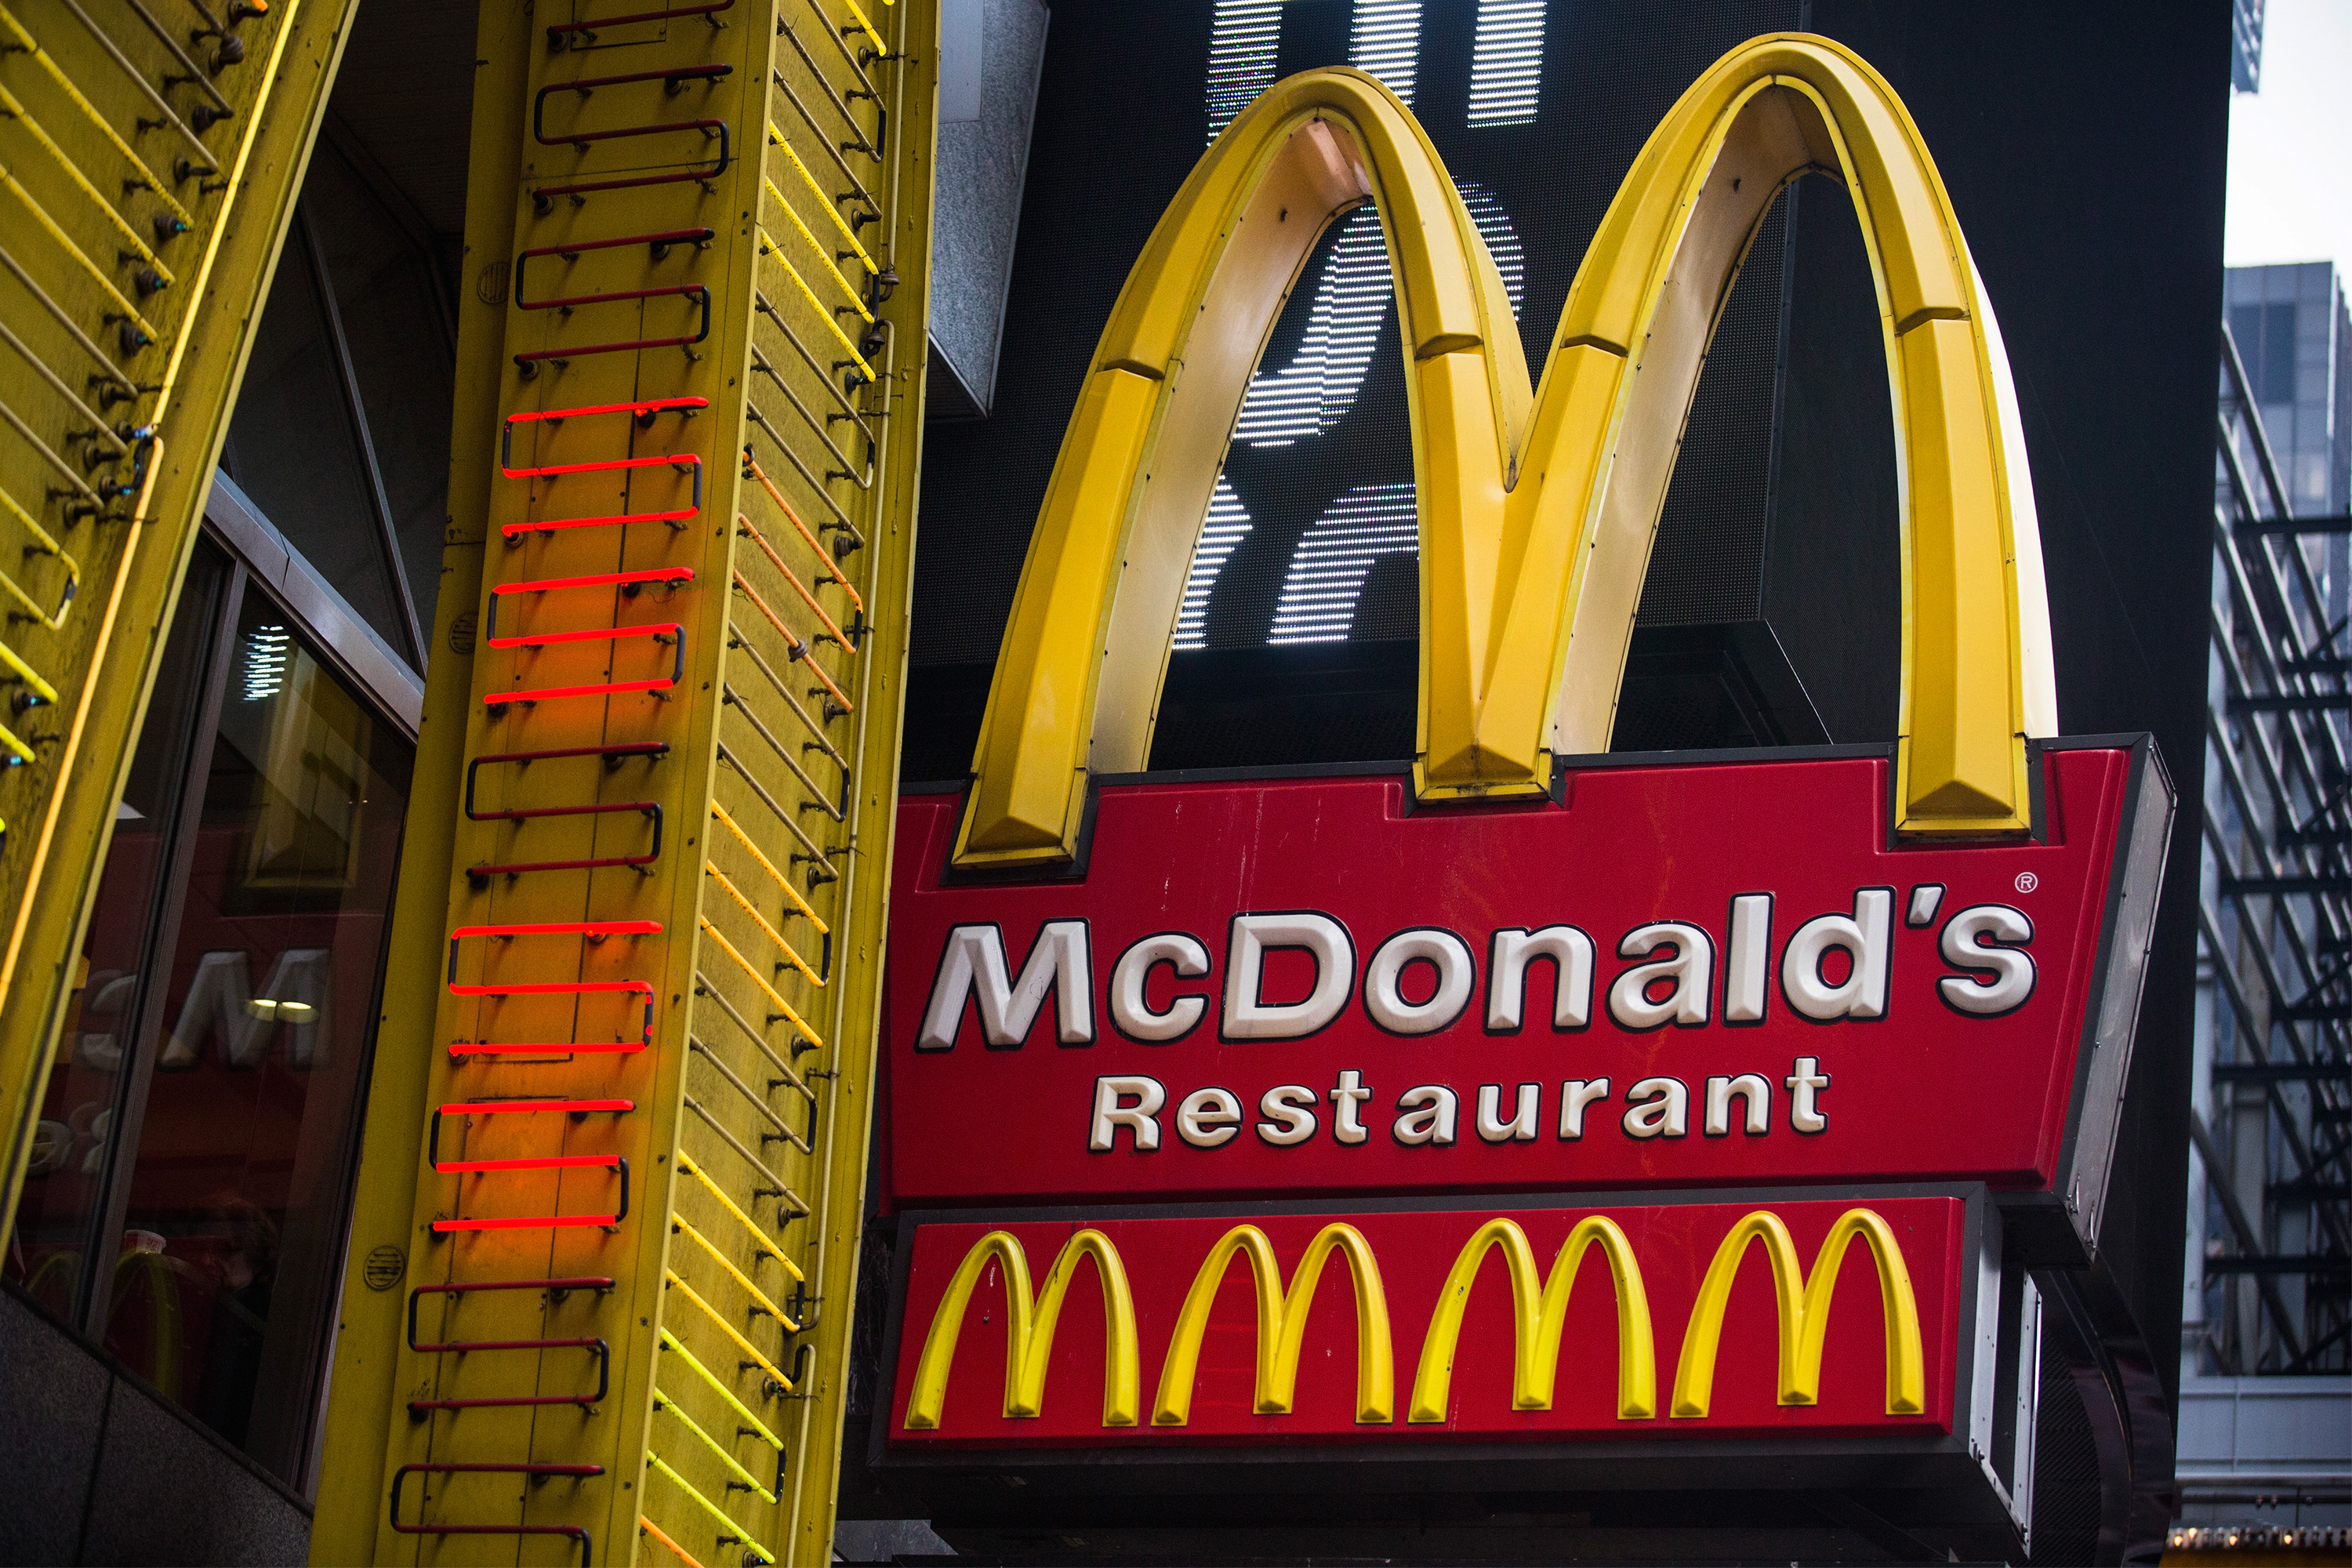 A sign for a McDonald's restaurant is seen in Times Square on June 9, 2014 in New York City. (Andrew Burton&mdash;Getty Images)